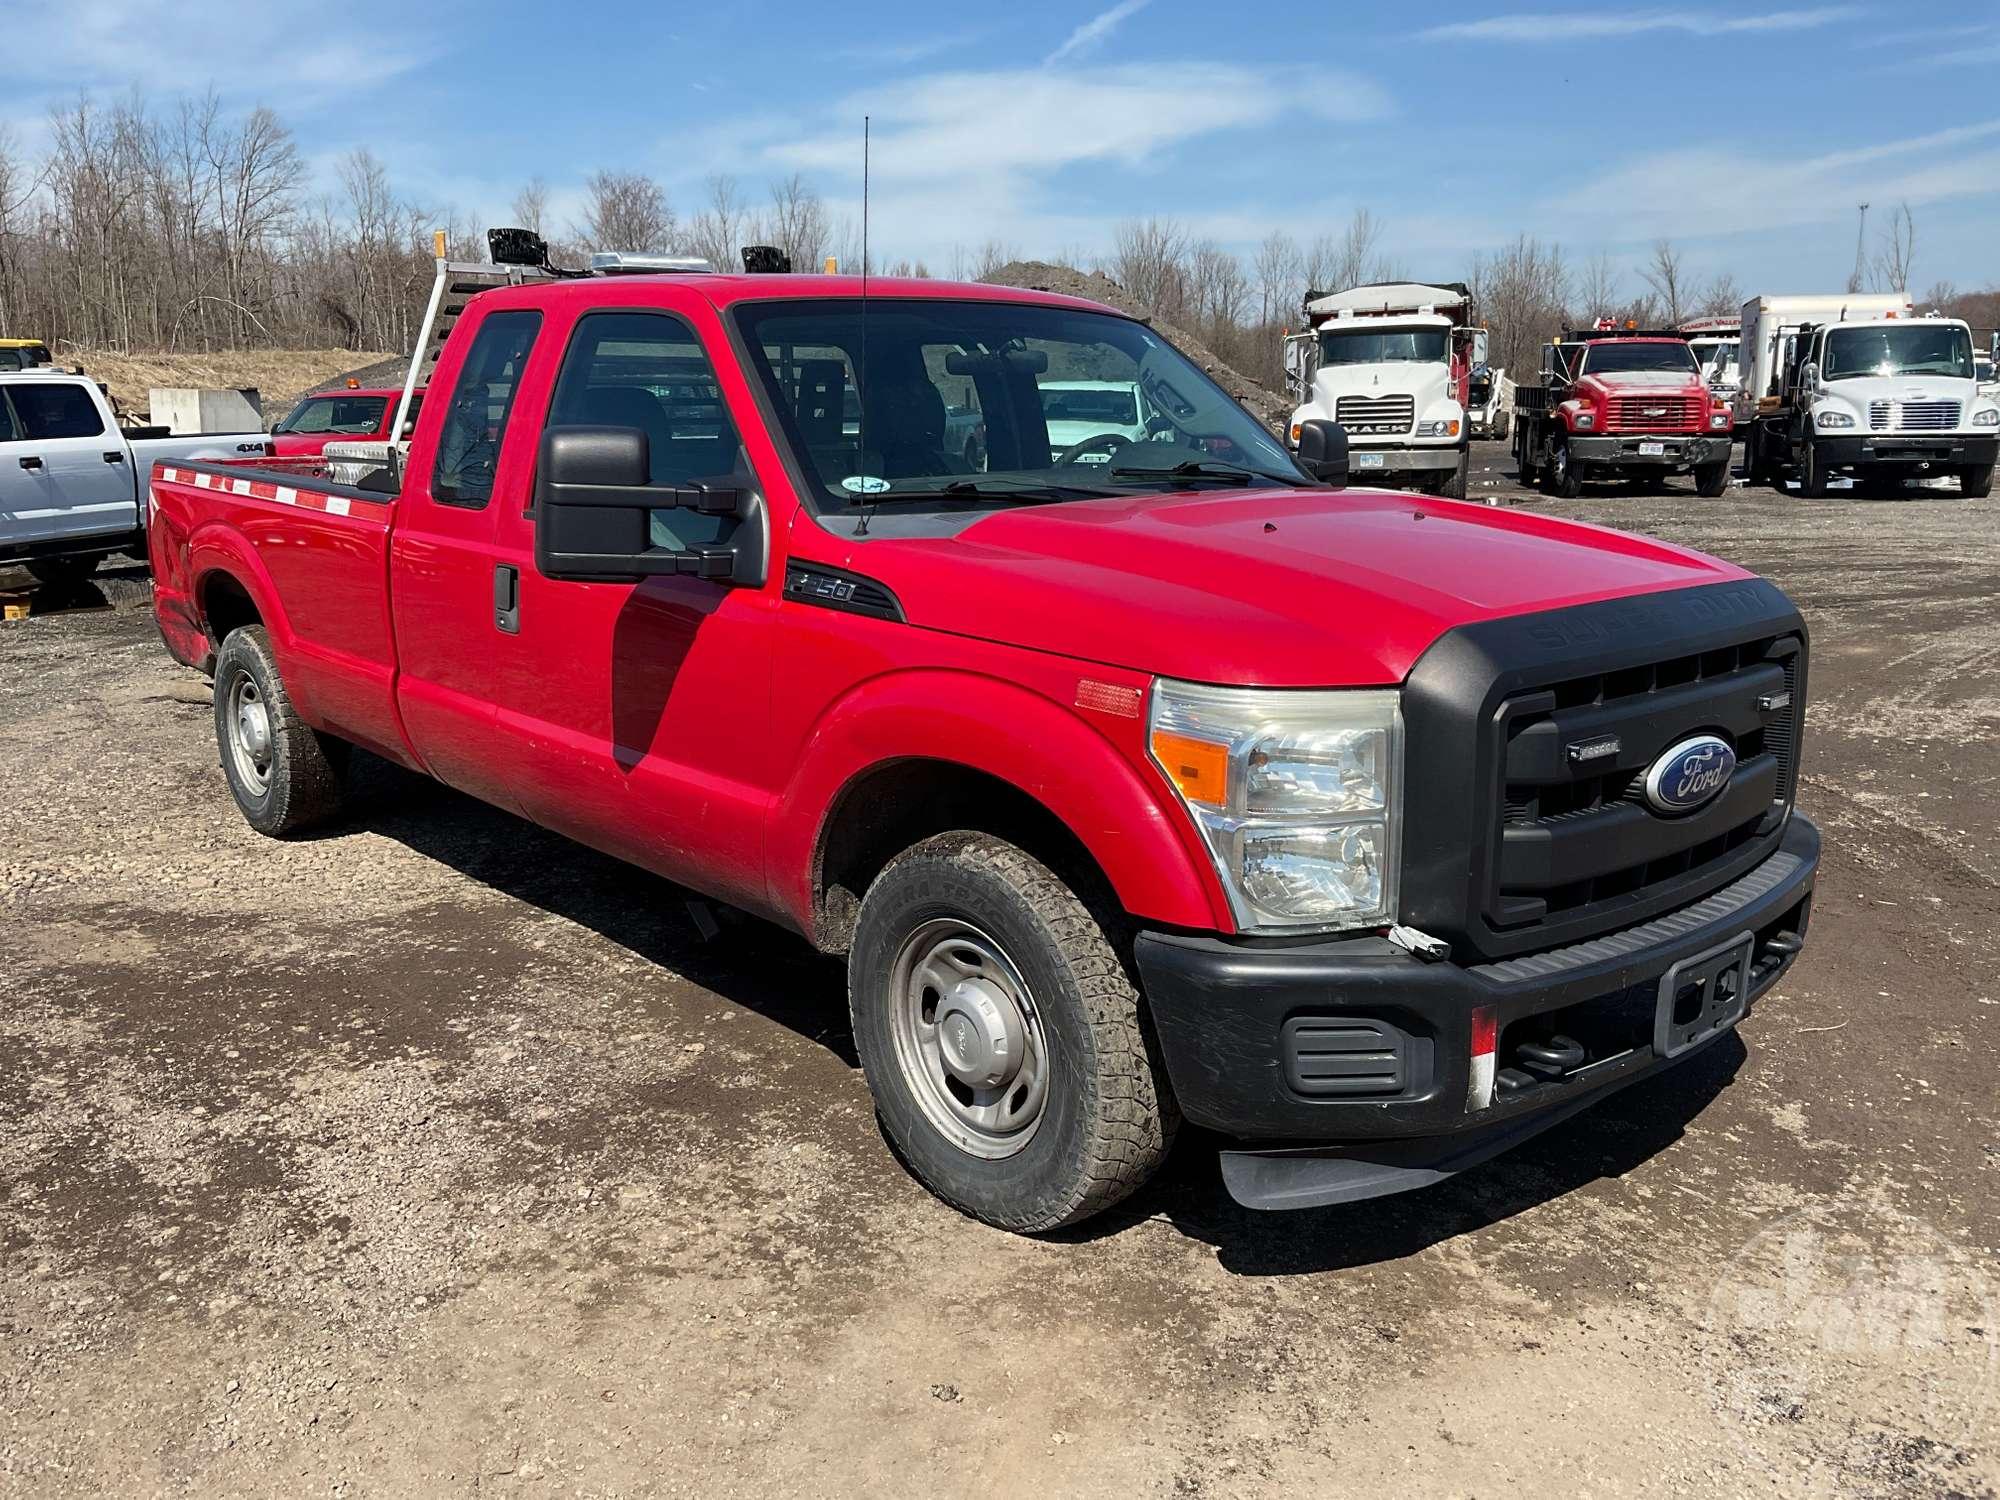 2011 FORD F-250 SUPER DUTY EXTENDED CAB 3/4 TON PICKUP VIN: 1FT7X2A67BEA31356